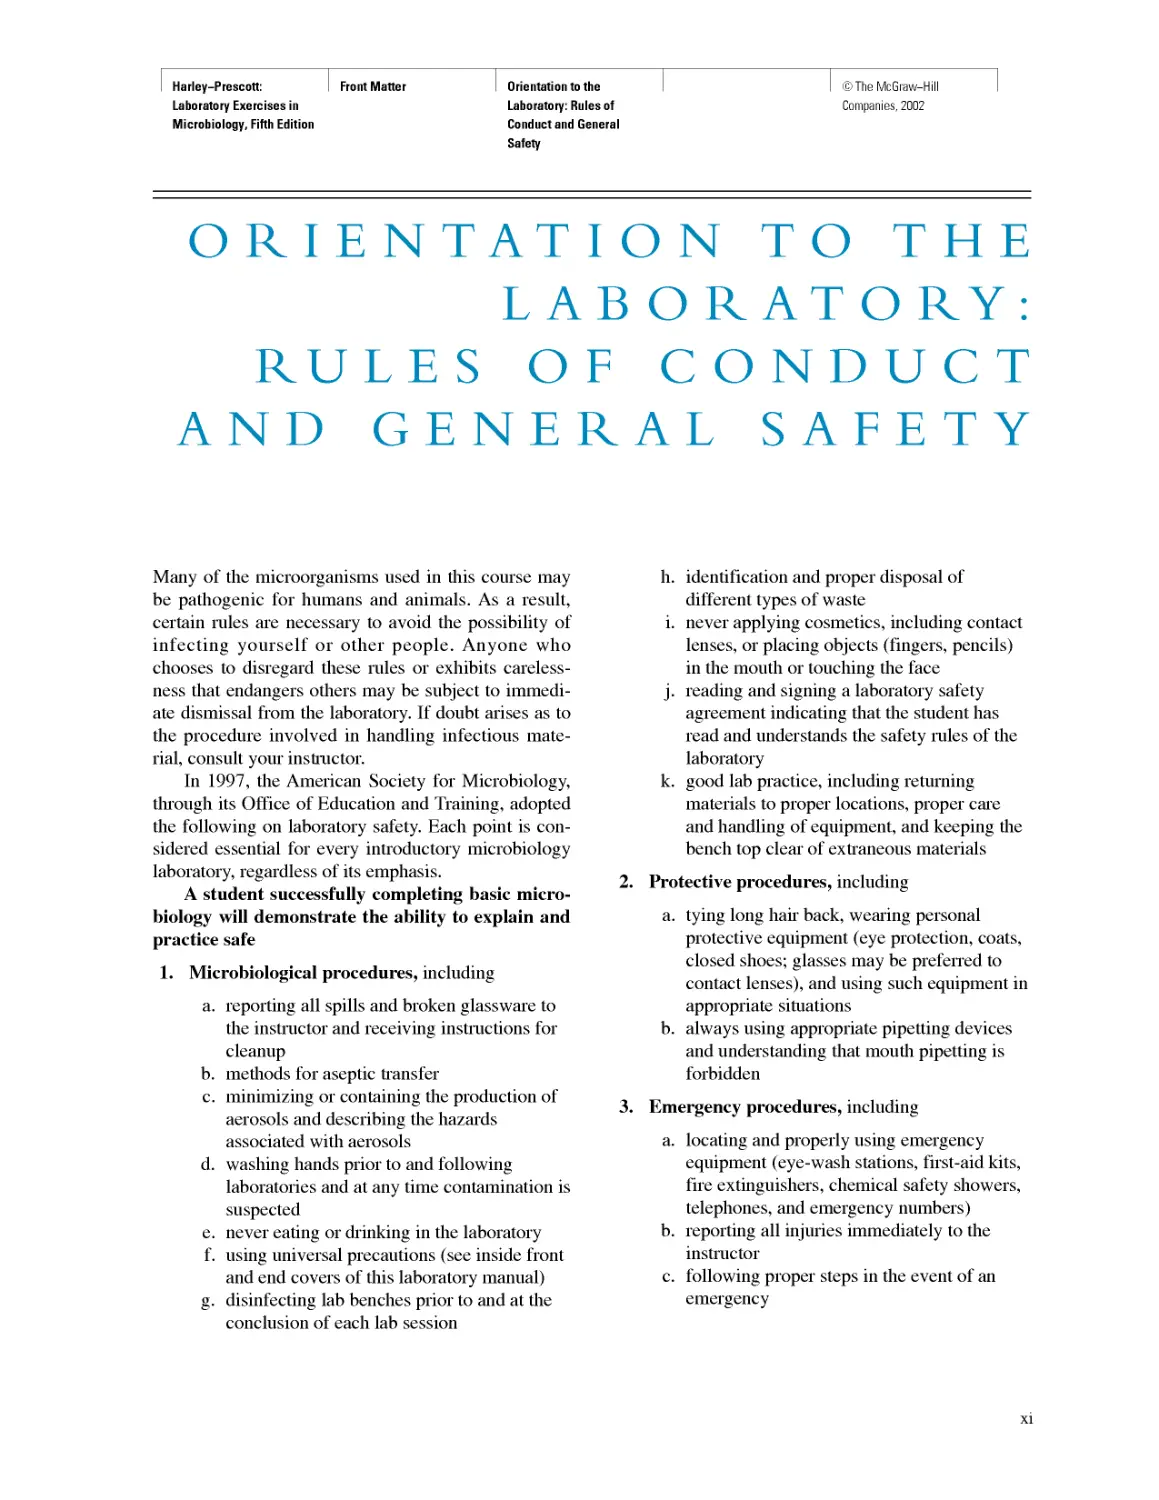 Orientation to the Laboratory: Rules of Conduct and General Safety